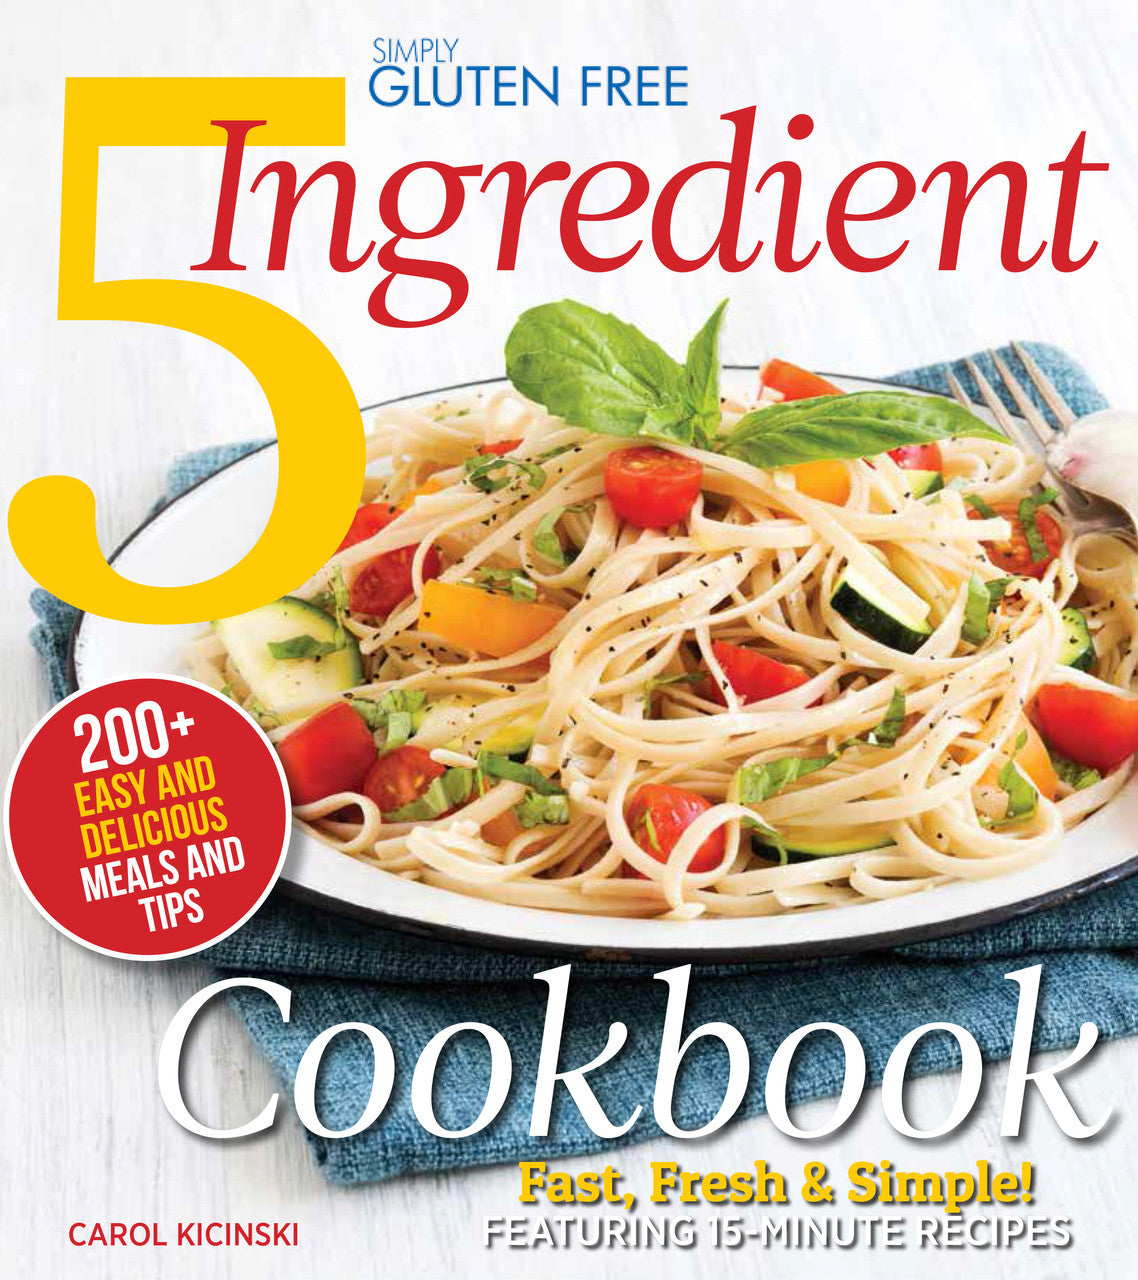 Simply Gluten-Free 5 Ingredient Cookbook SIGNED by Carol